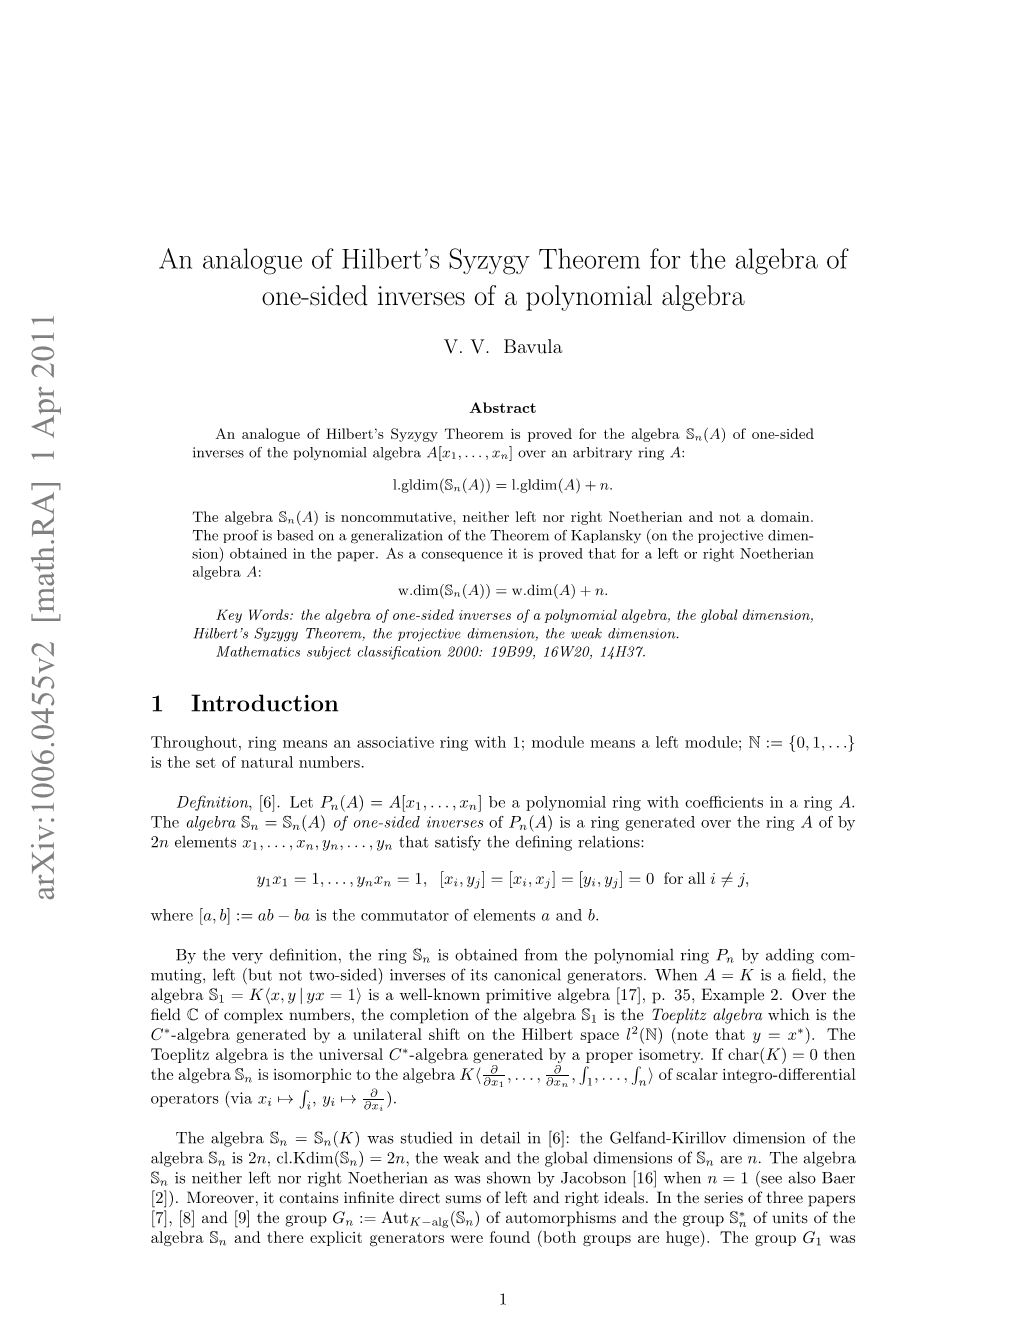 An Analogue of Hilbert's Syzygy Theorem for the Algebra of One-Sided Inverses of a Polynomial Algebra